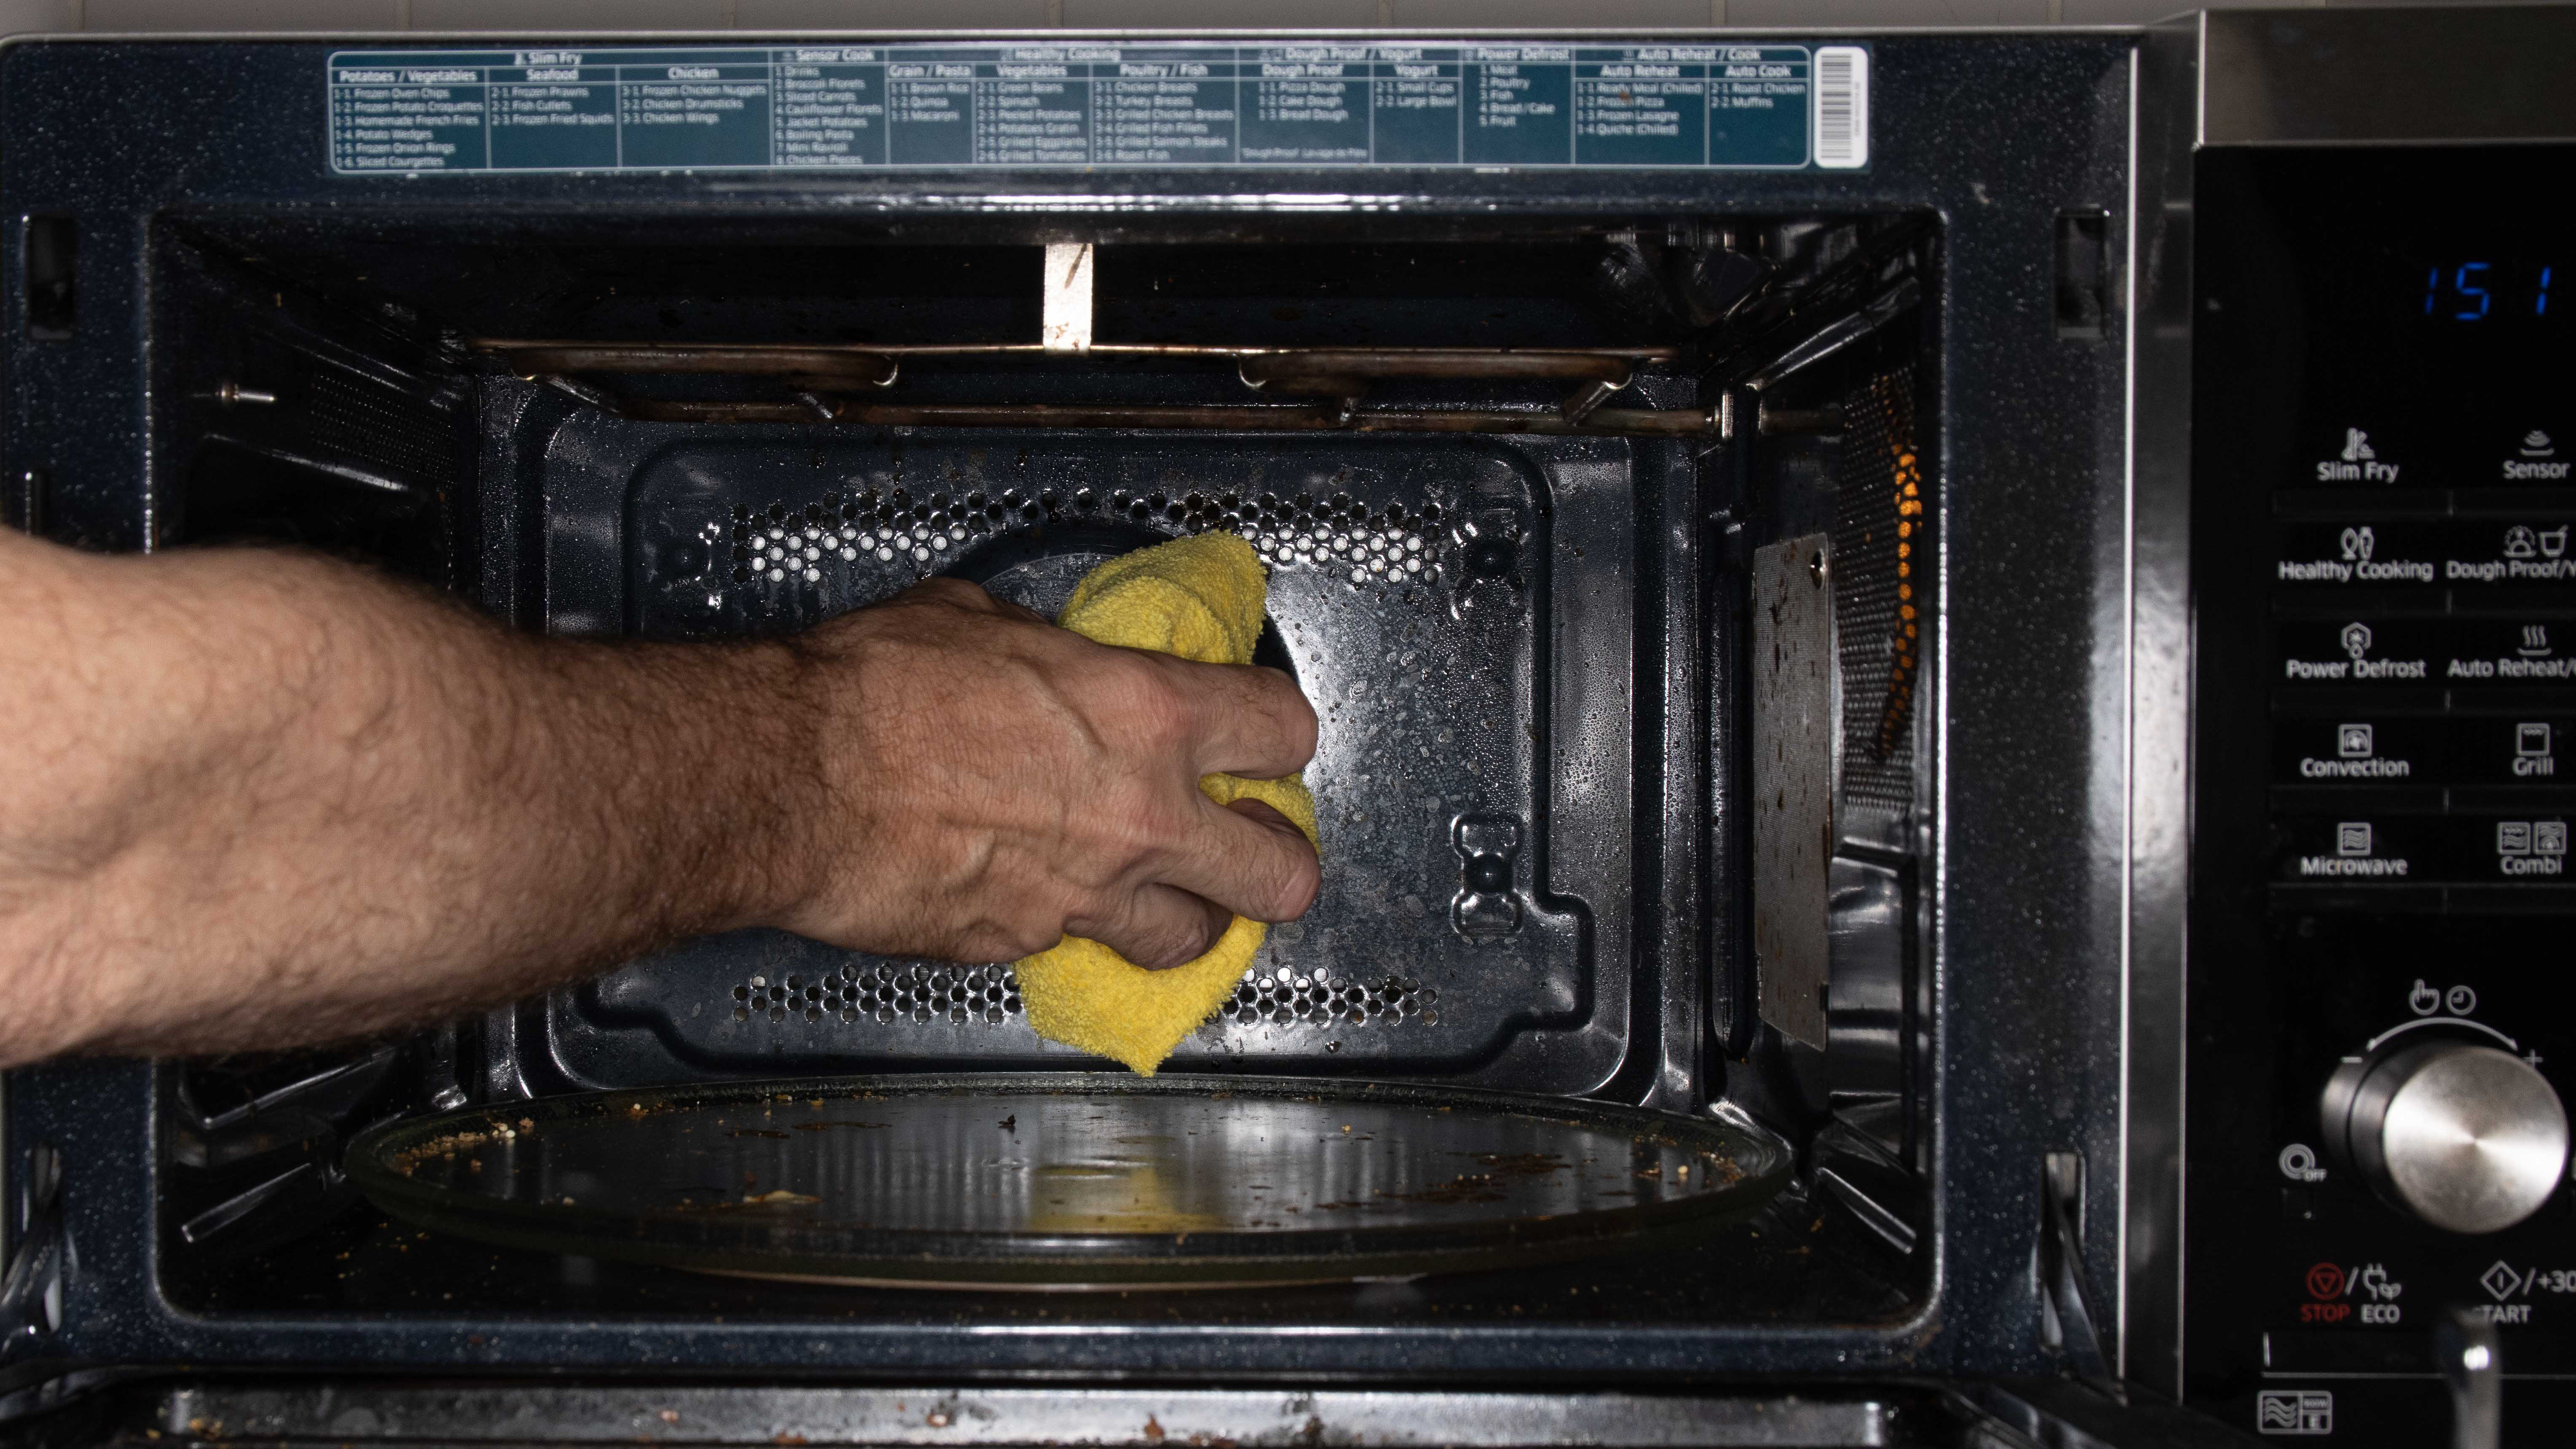 Cleaning the microwave oven